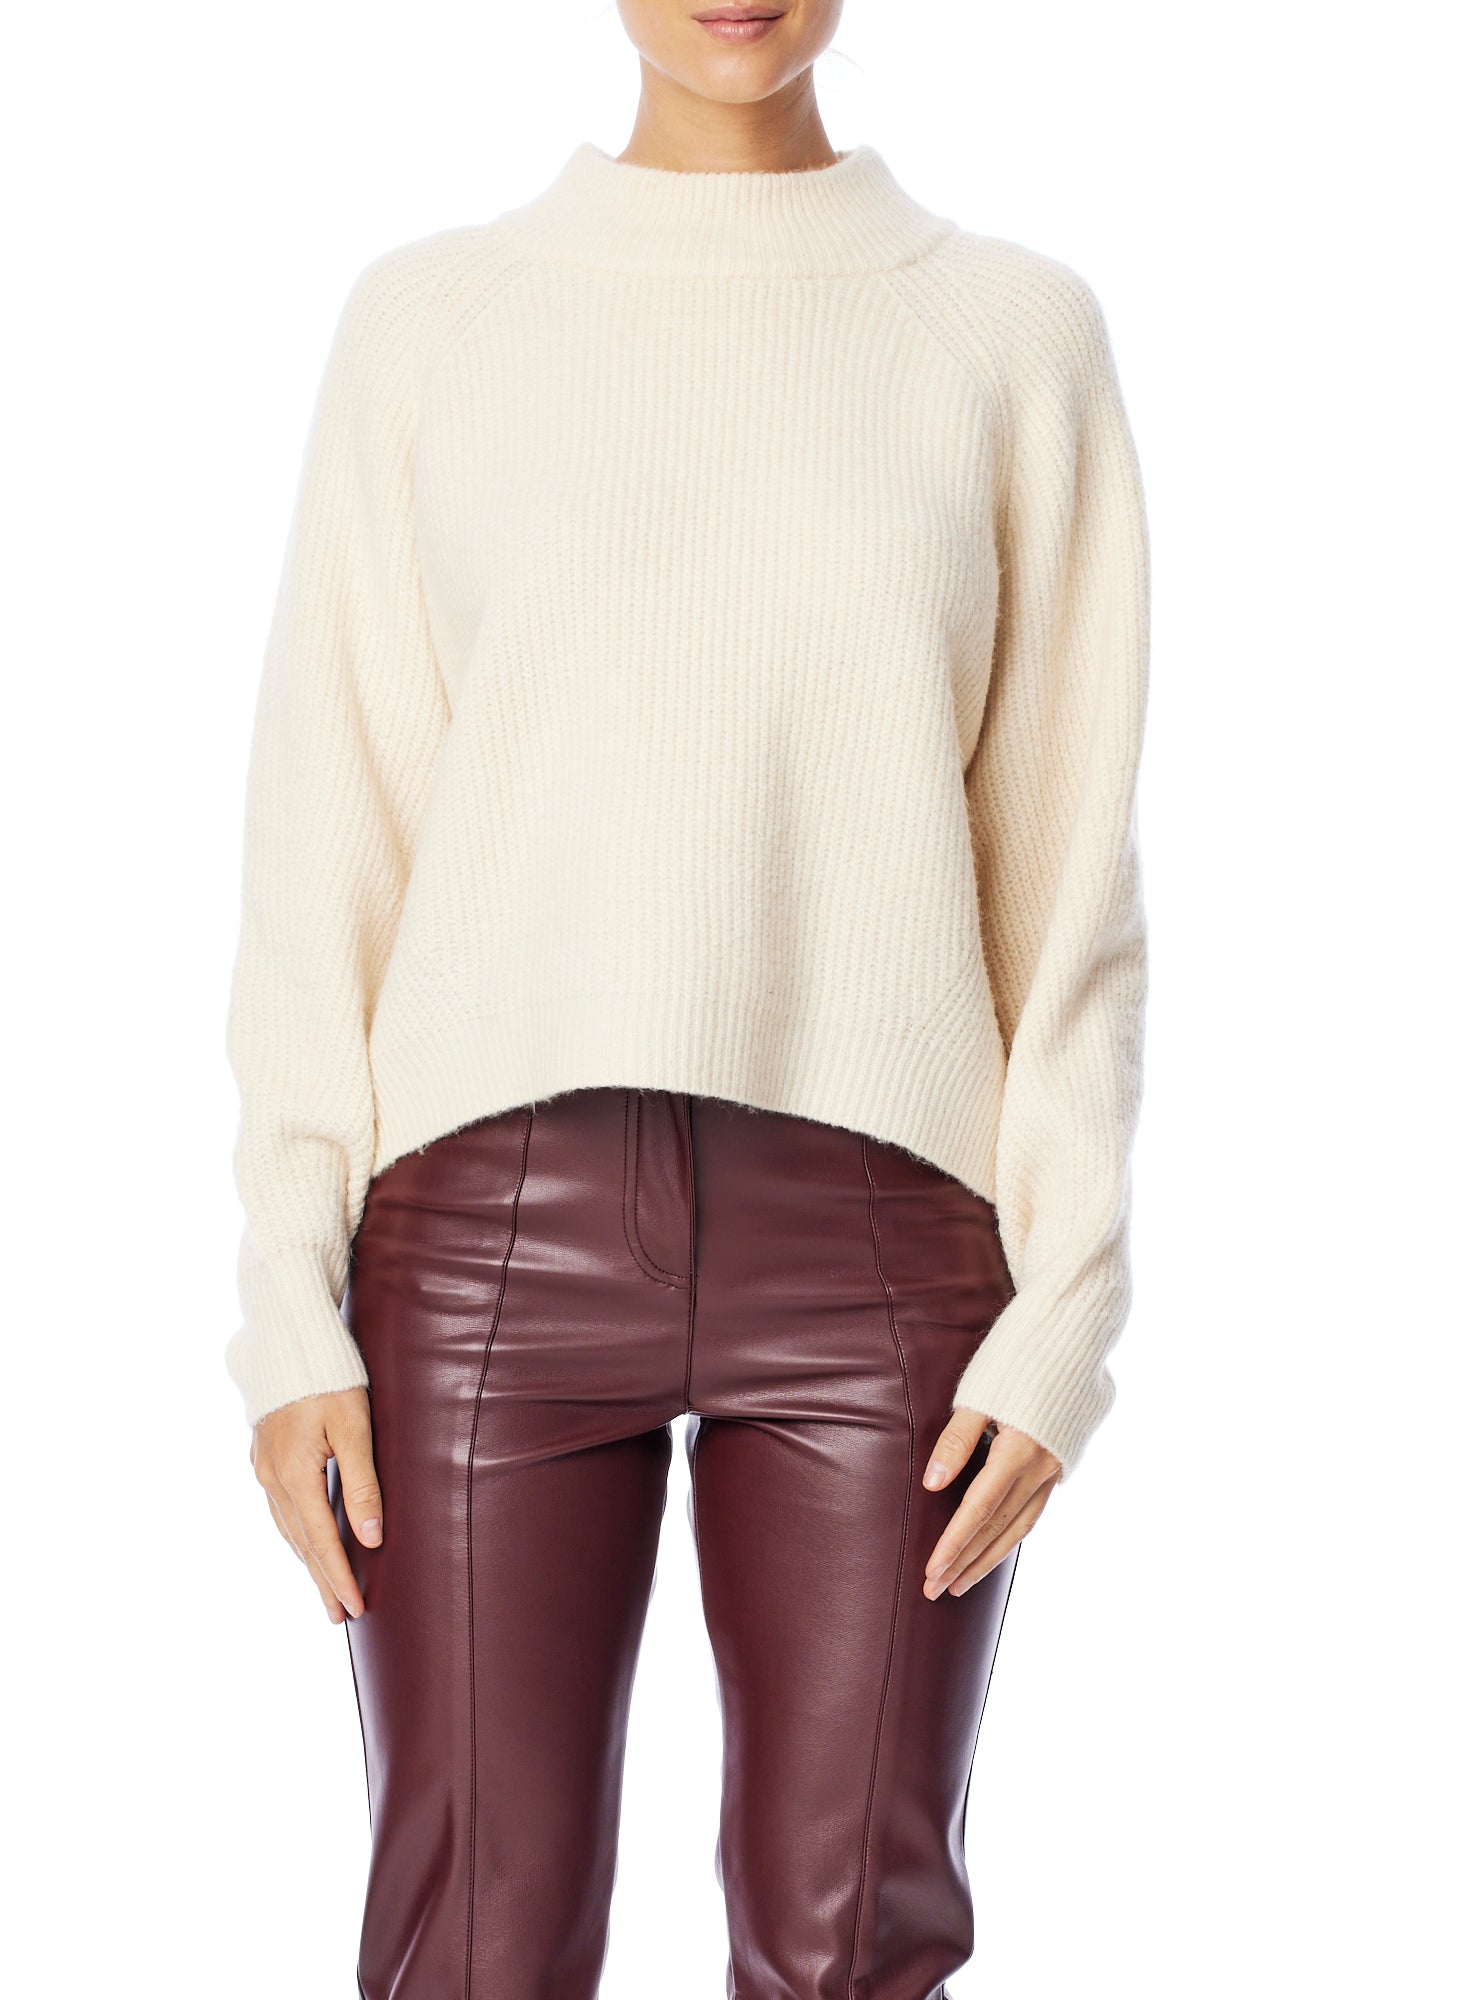 mock turtleneck sweater with stitch detailing, long sleeves and an easy, relaxed fit in creme